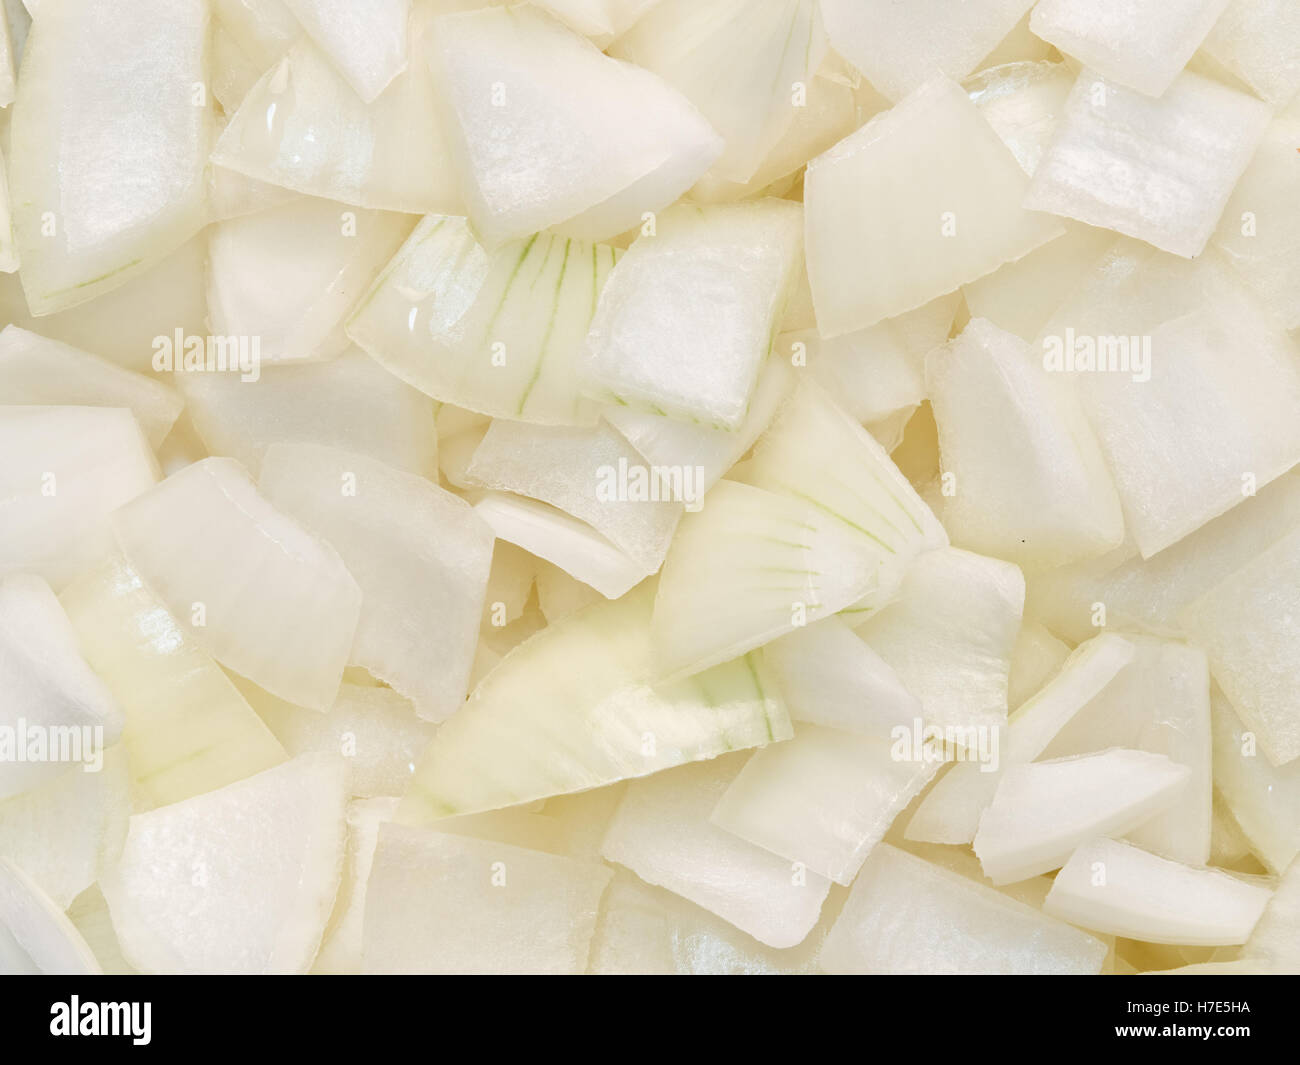 diced cut onion food background Stock Photo